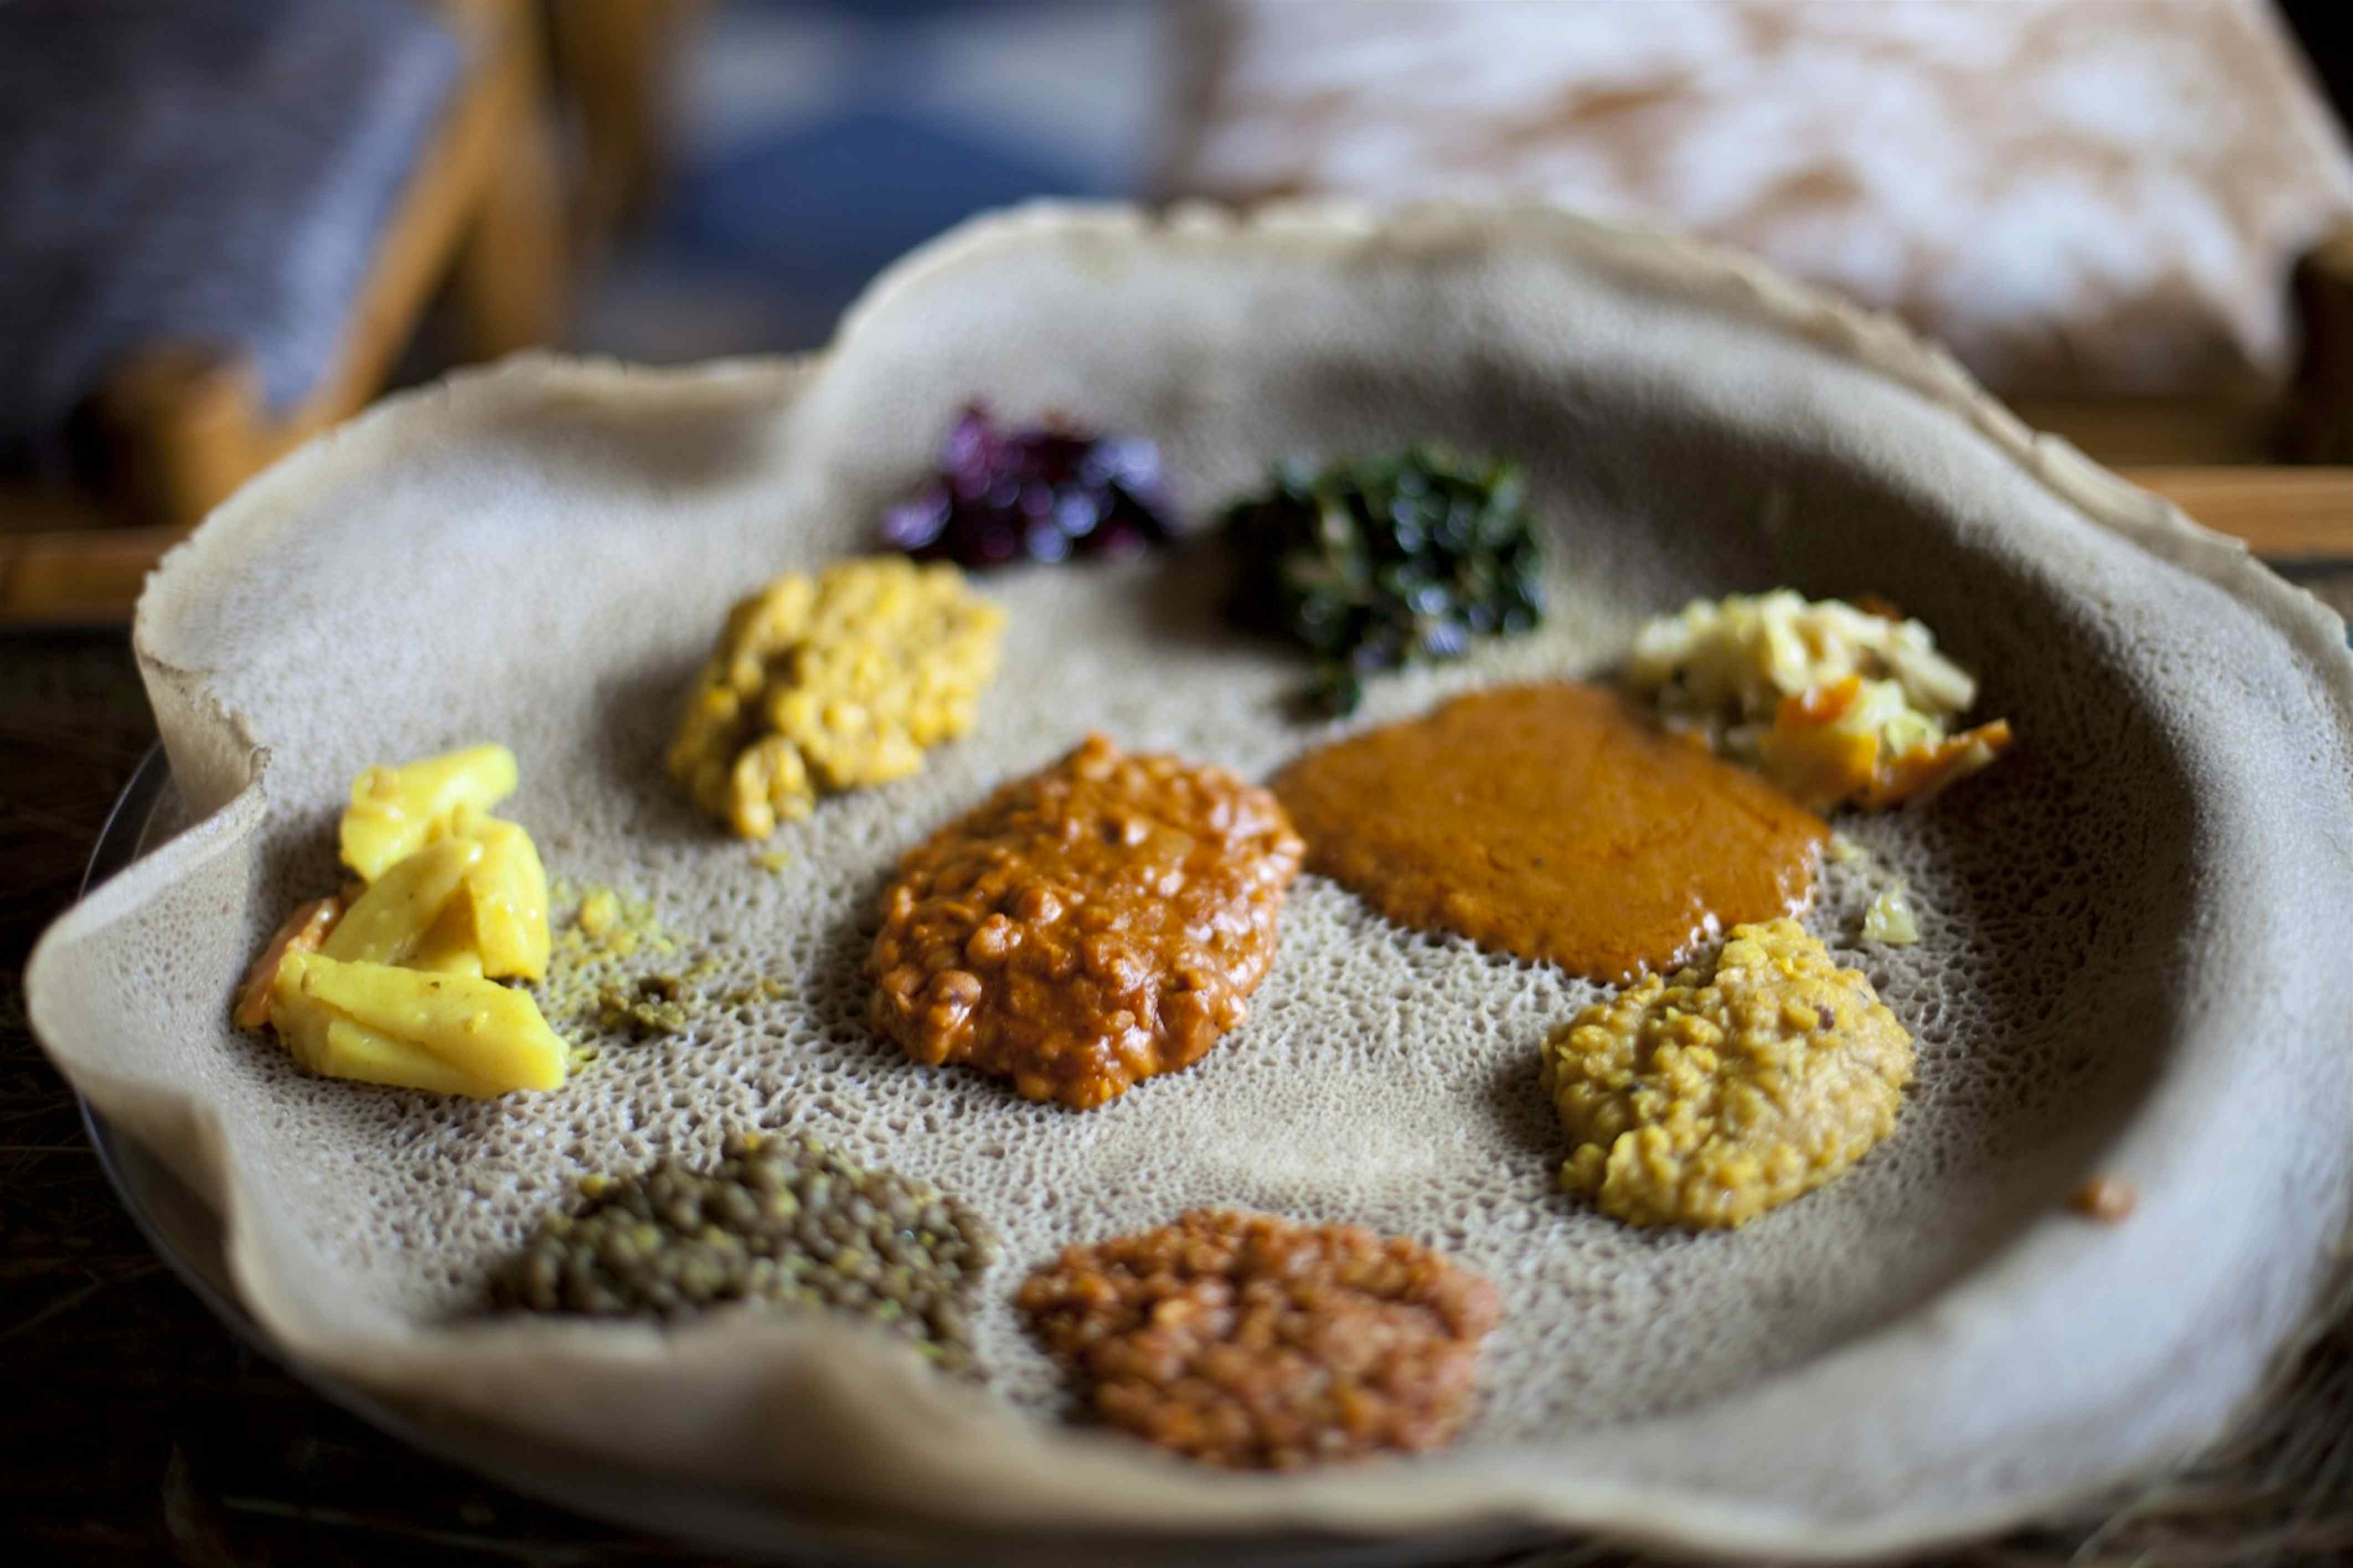 business plan project on sales of injera in ethiopia